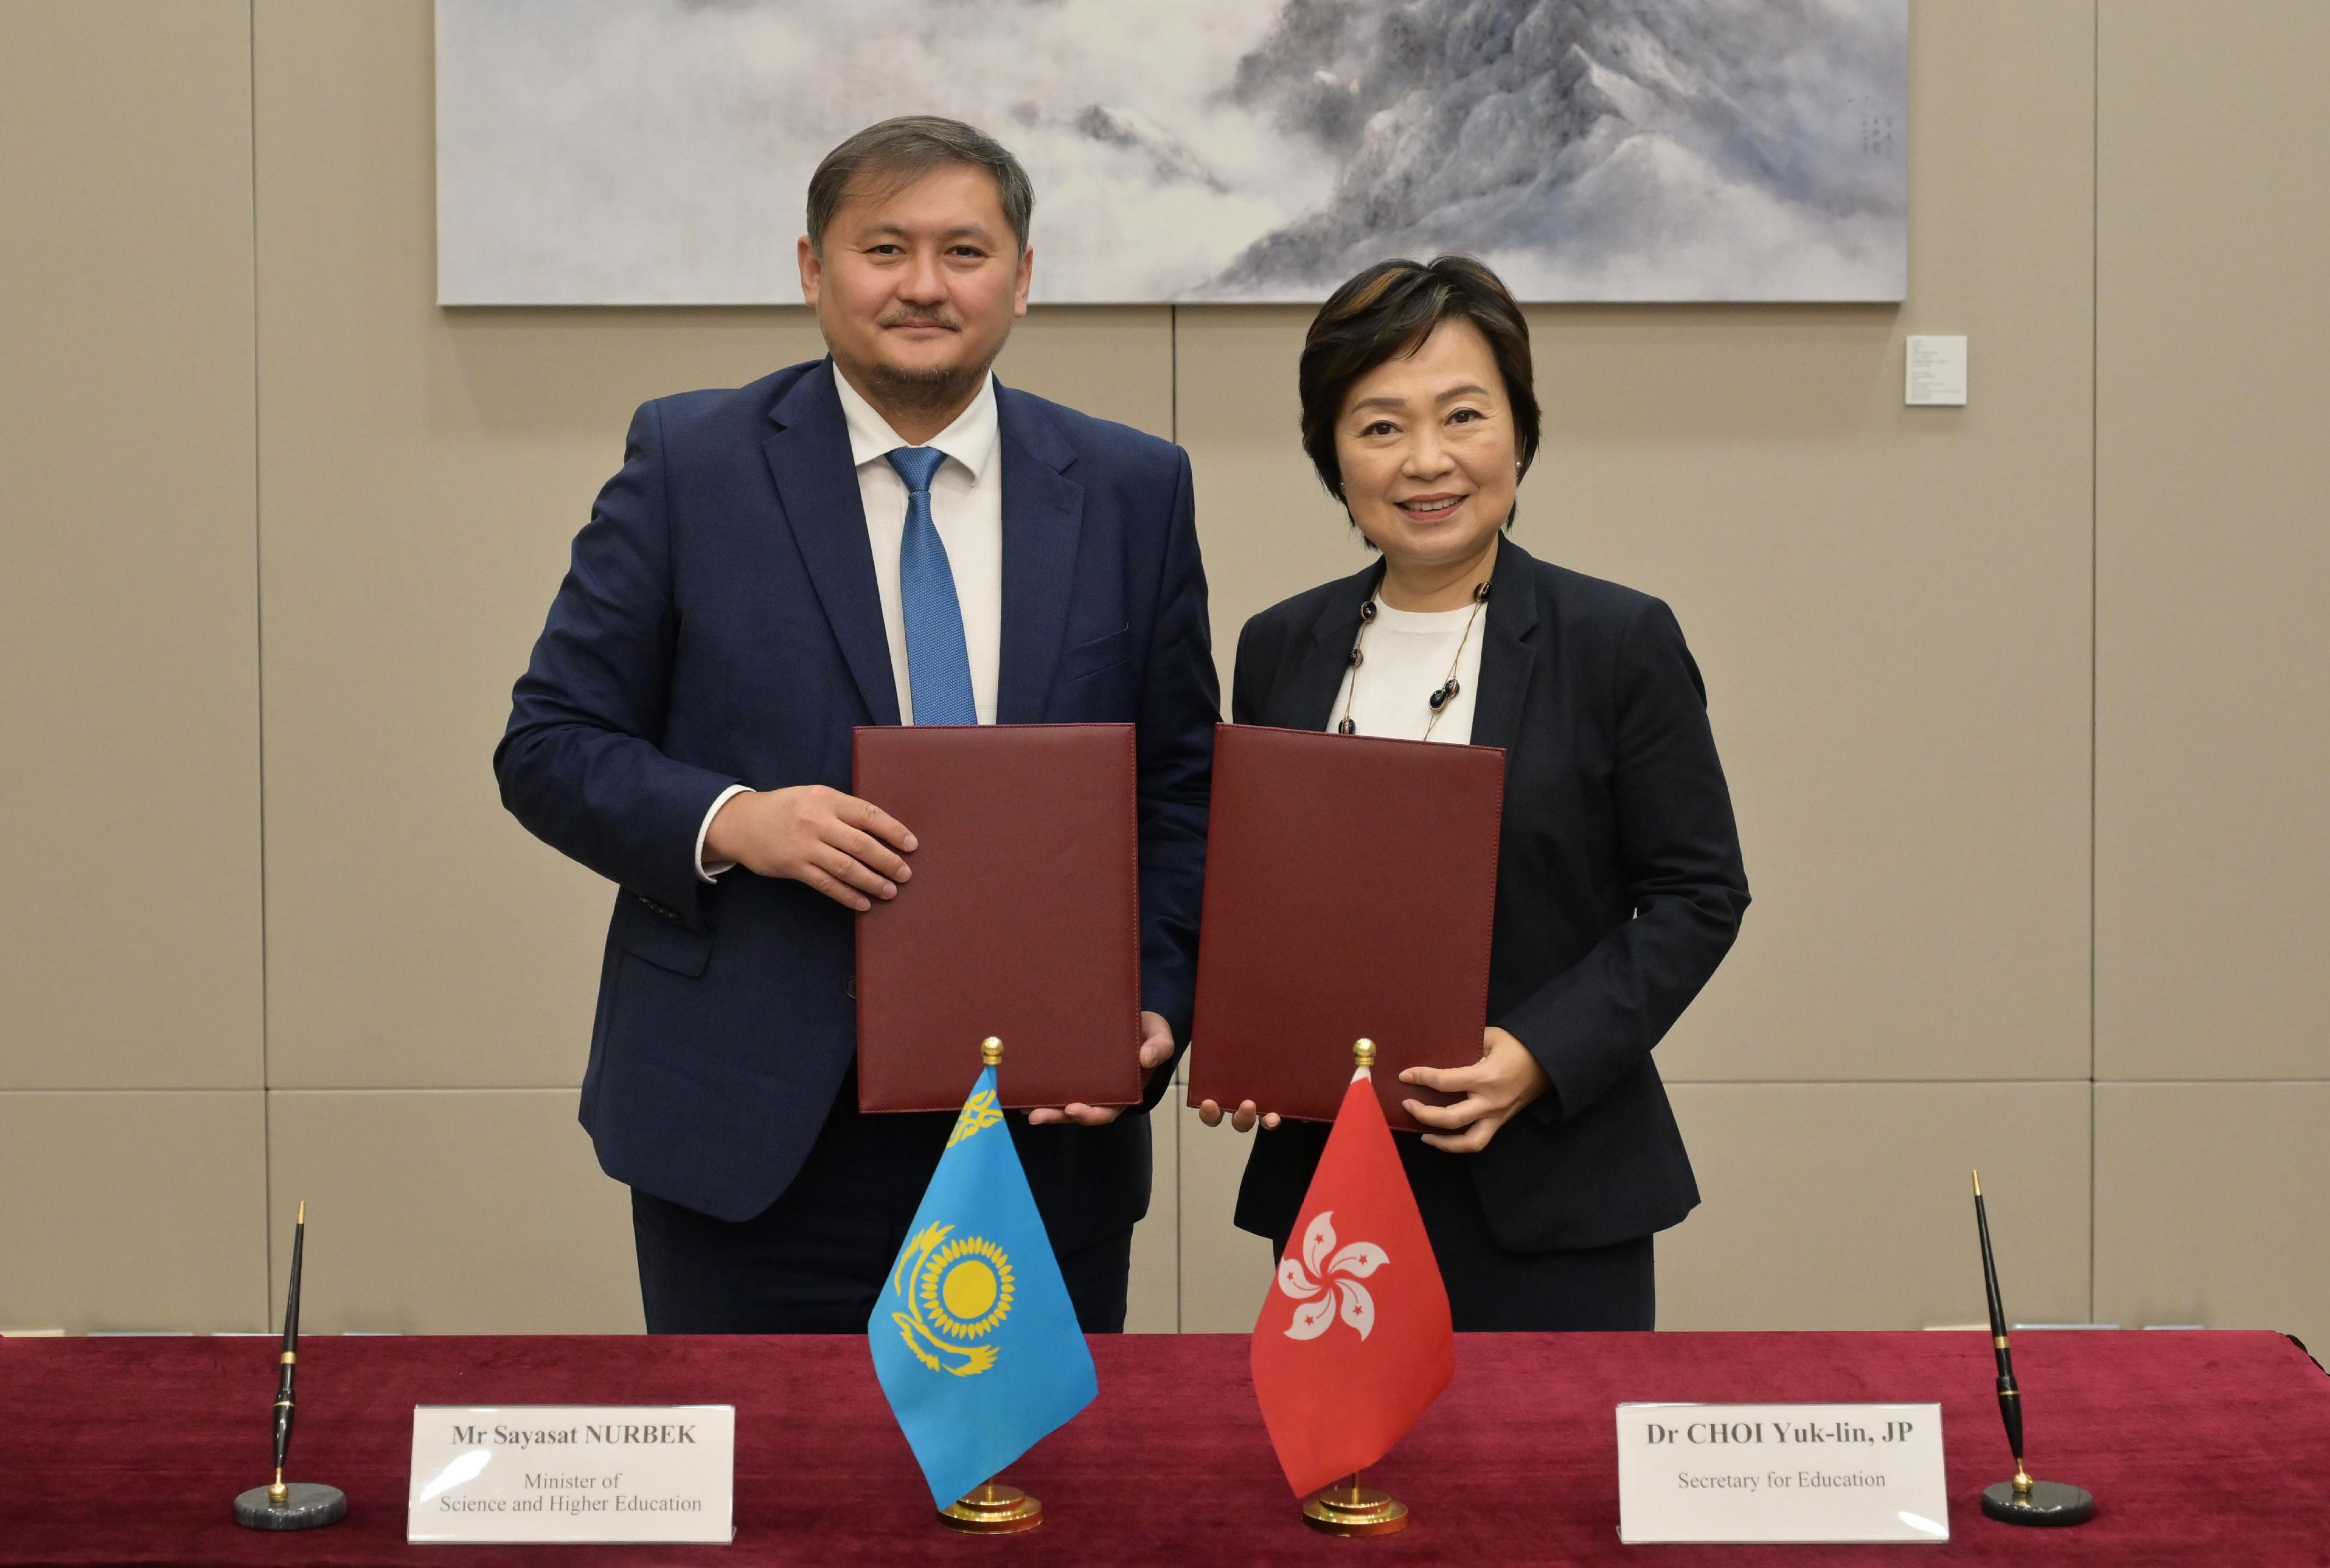 The Secretary for Education, Dr Choi Yuk-lin (right), is pictured with the Minister of Science and Higher Education of the Republic of Kazakhstan, Mr Sayasat Nurbek (left), after signing a Memorandum of Understanding on education co-operation today (August 17).